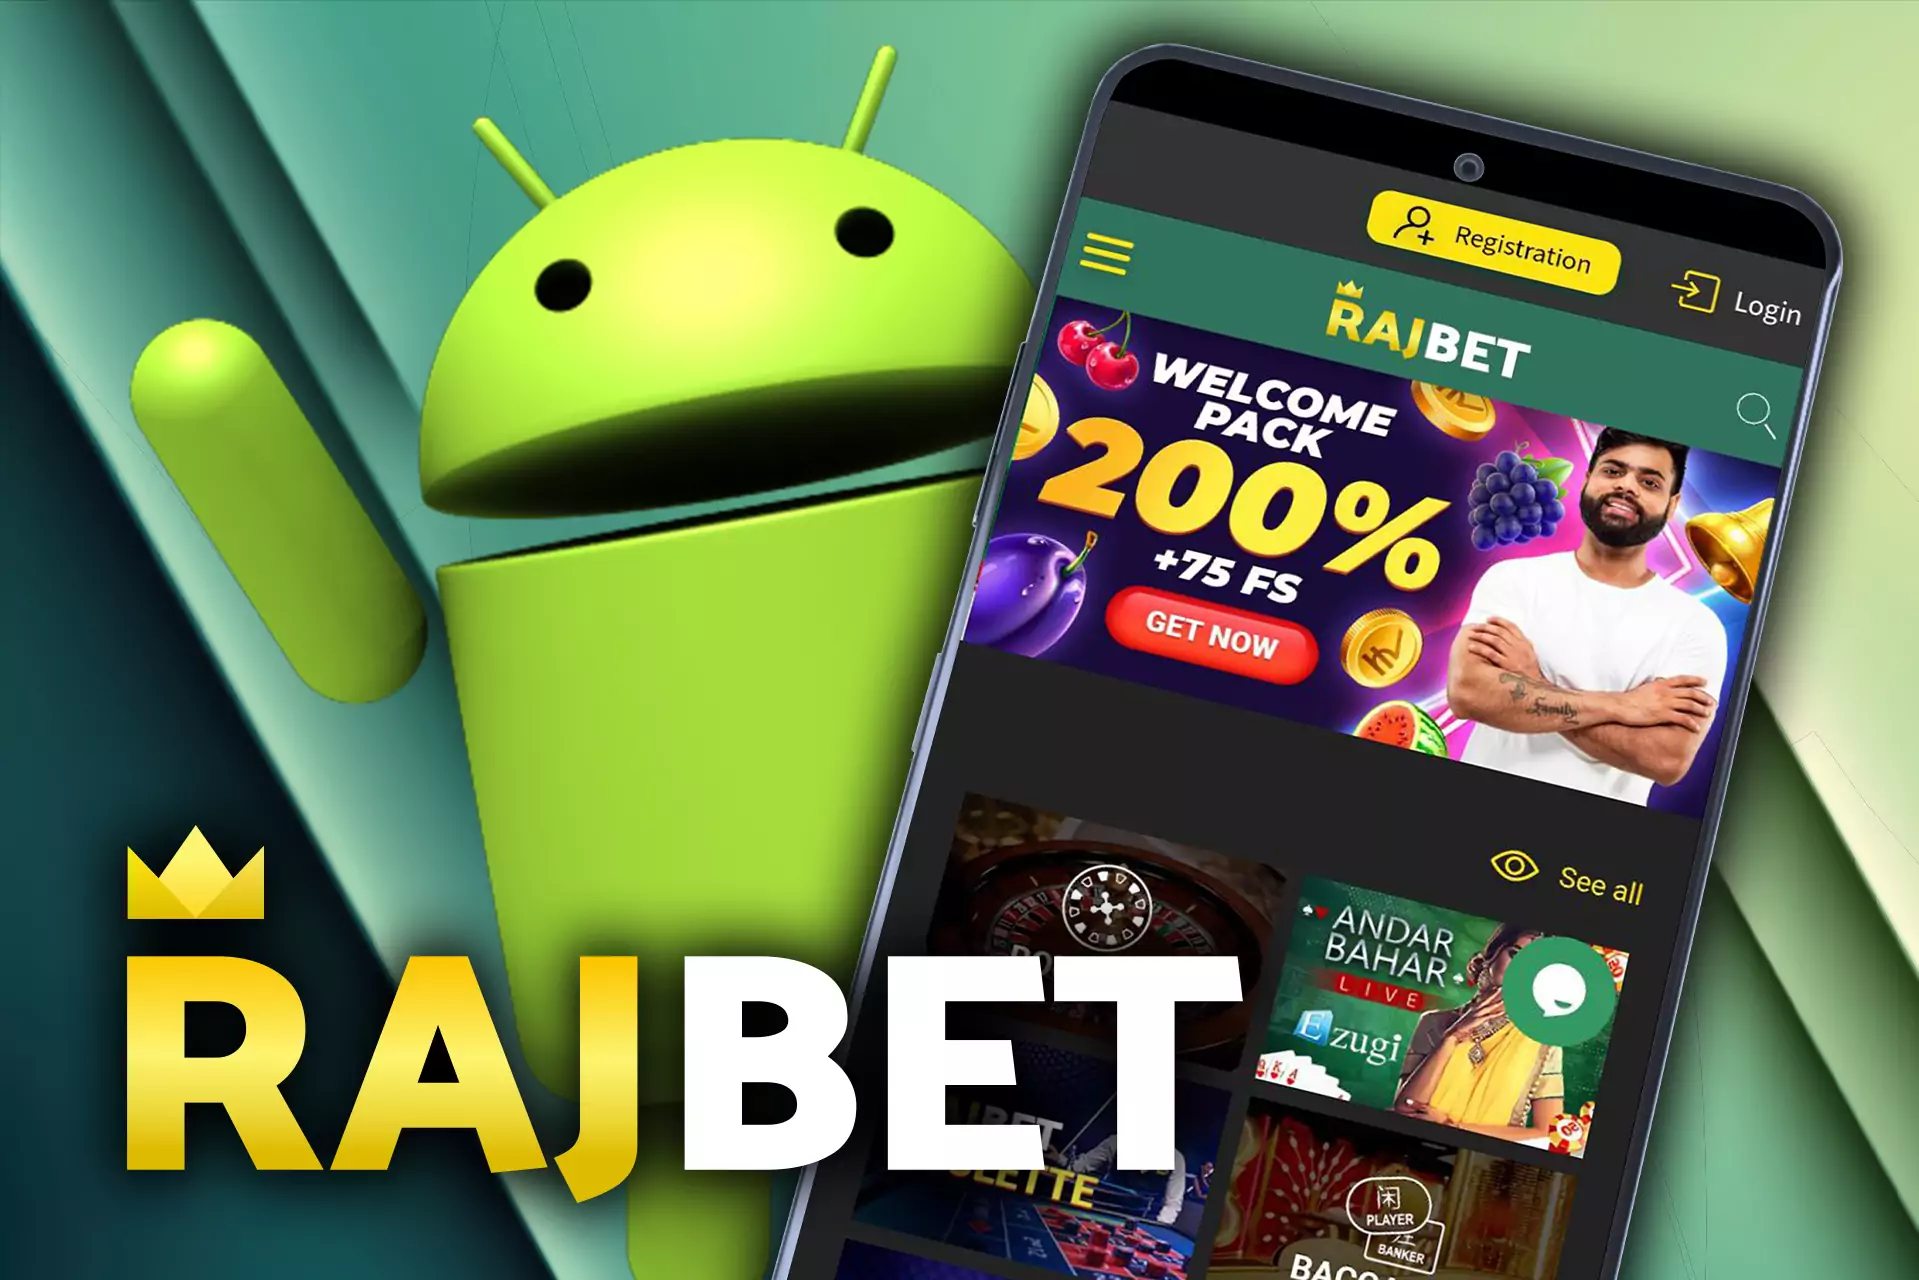 The Rajbet app is available for free for Android.